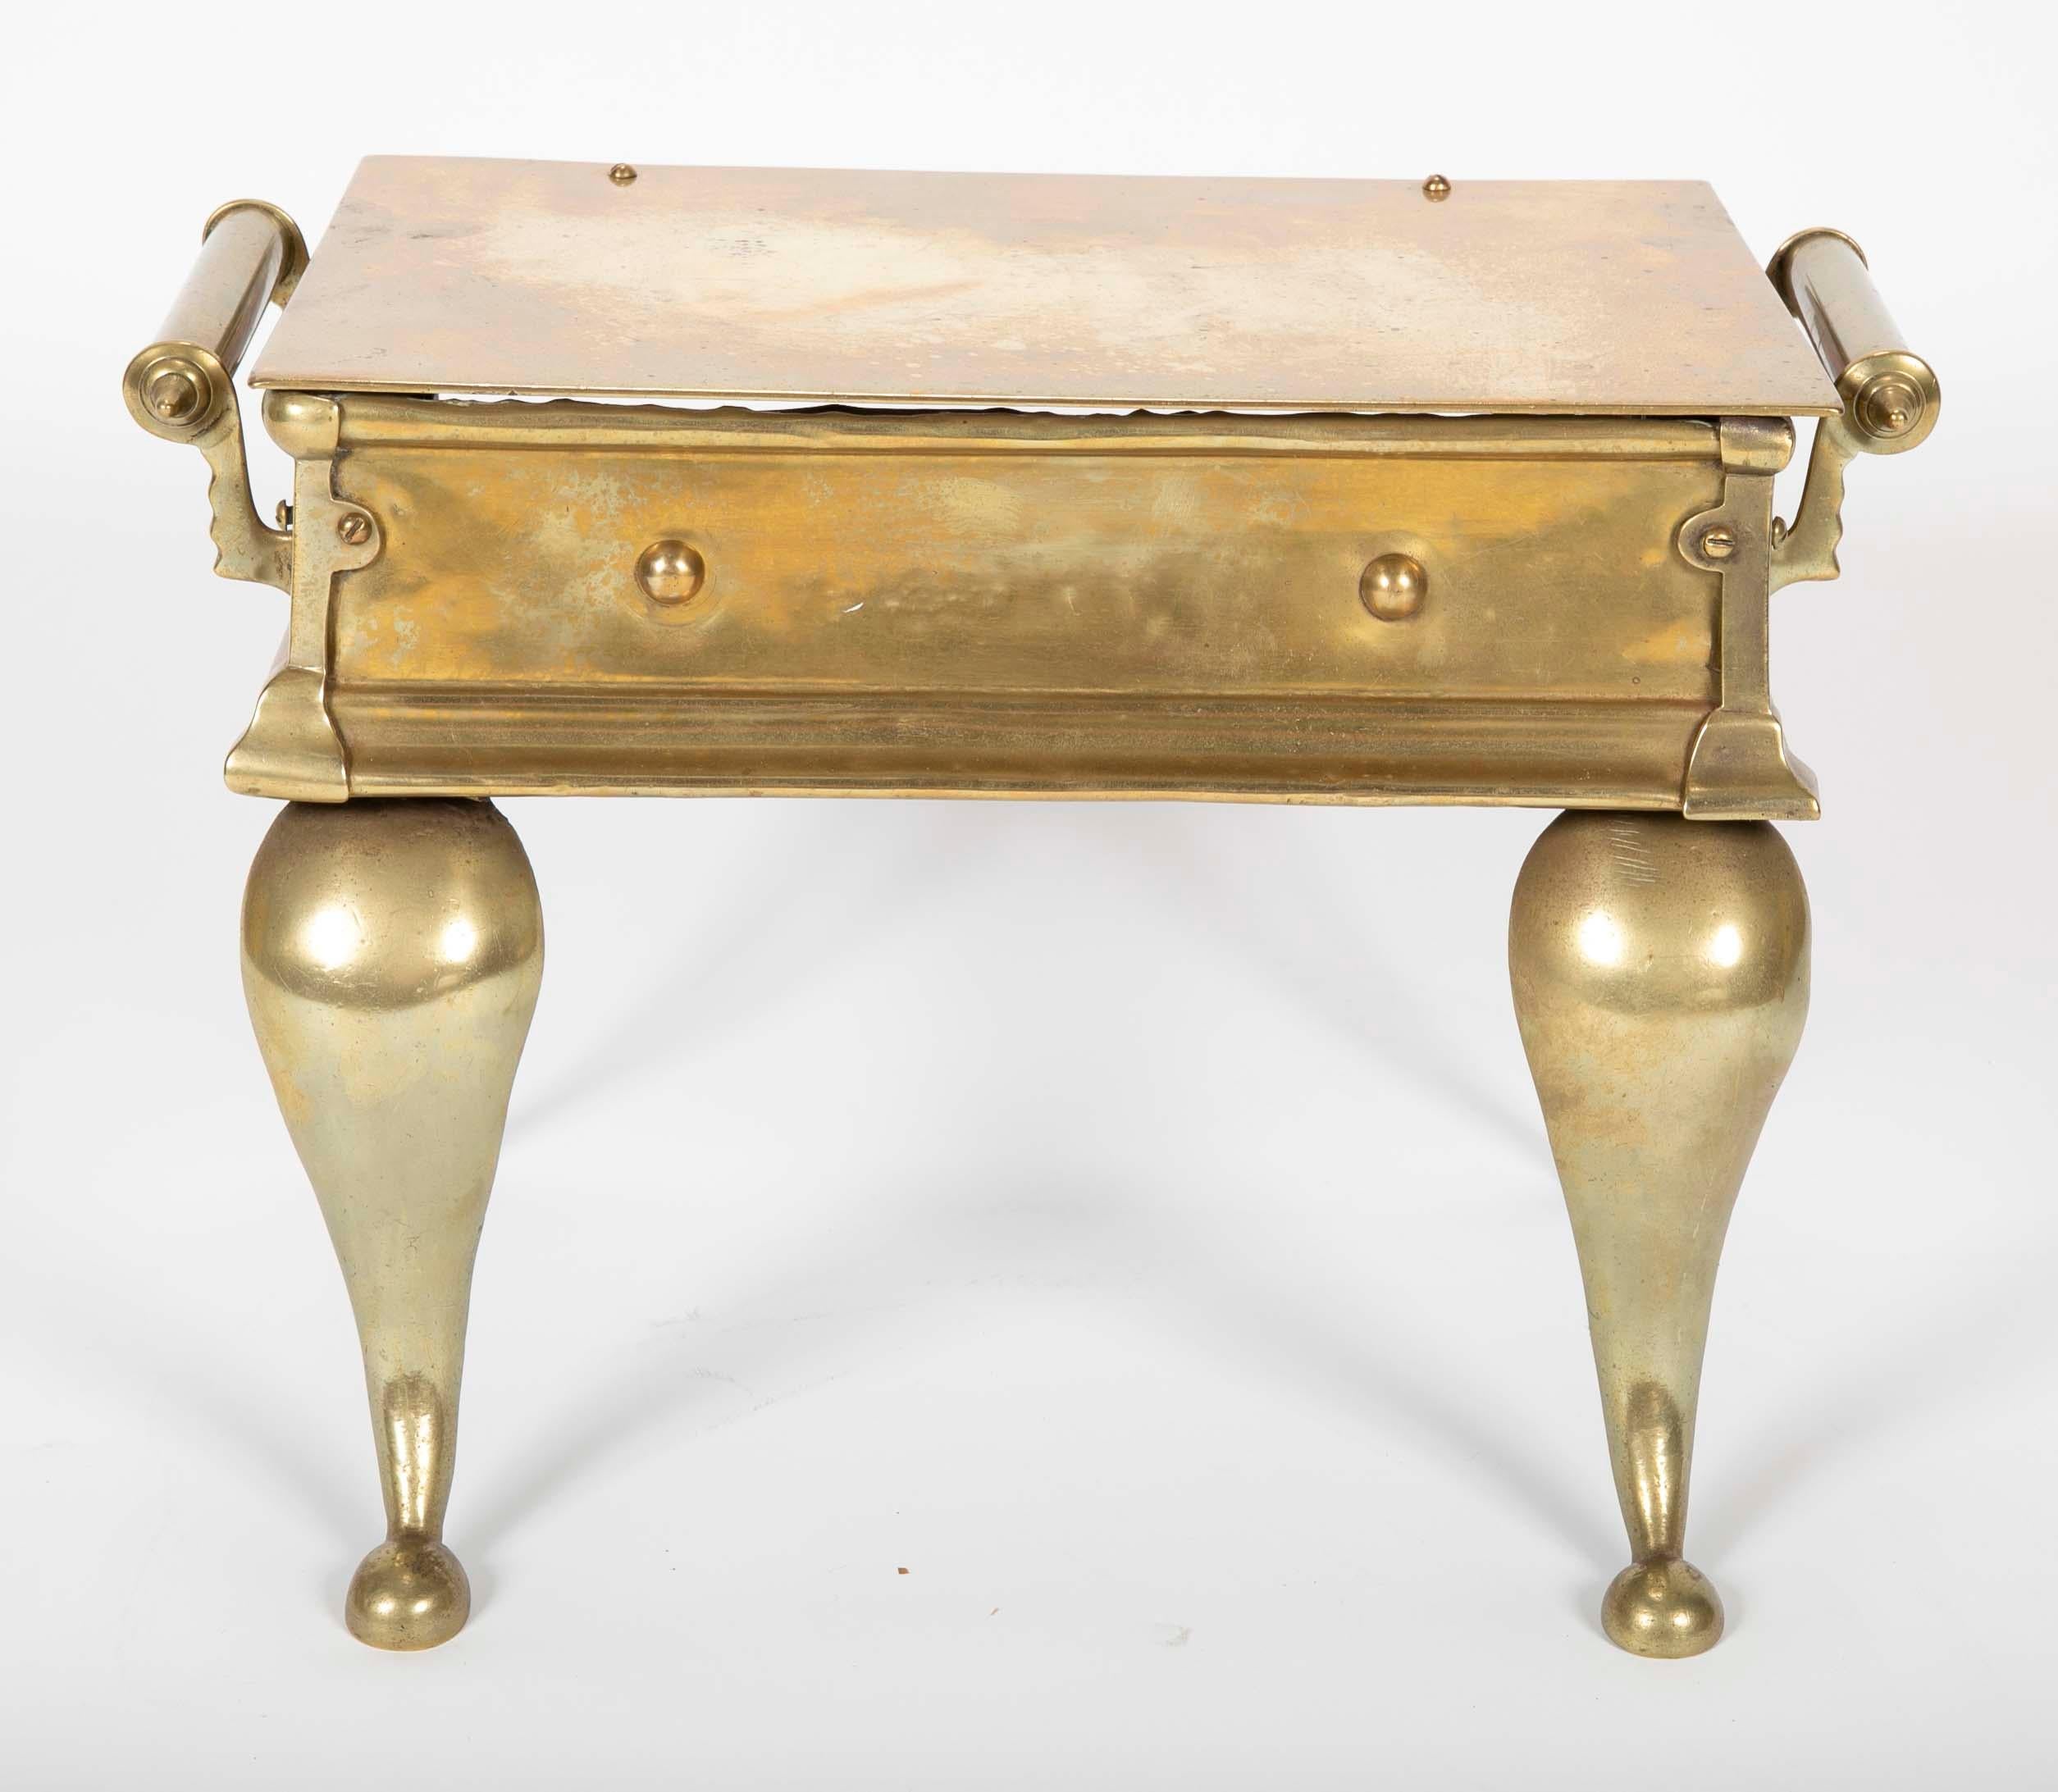 19th Century English Regency Brass Footman Stool or Side Table For Sale 1